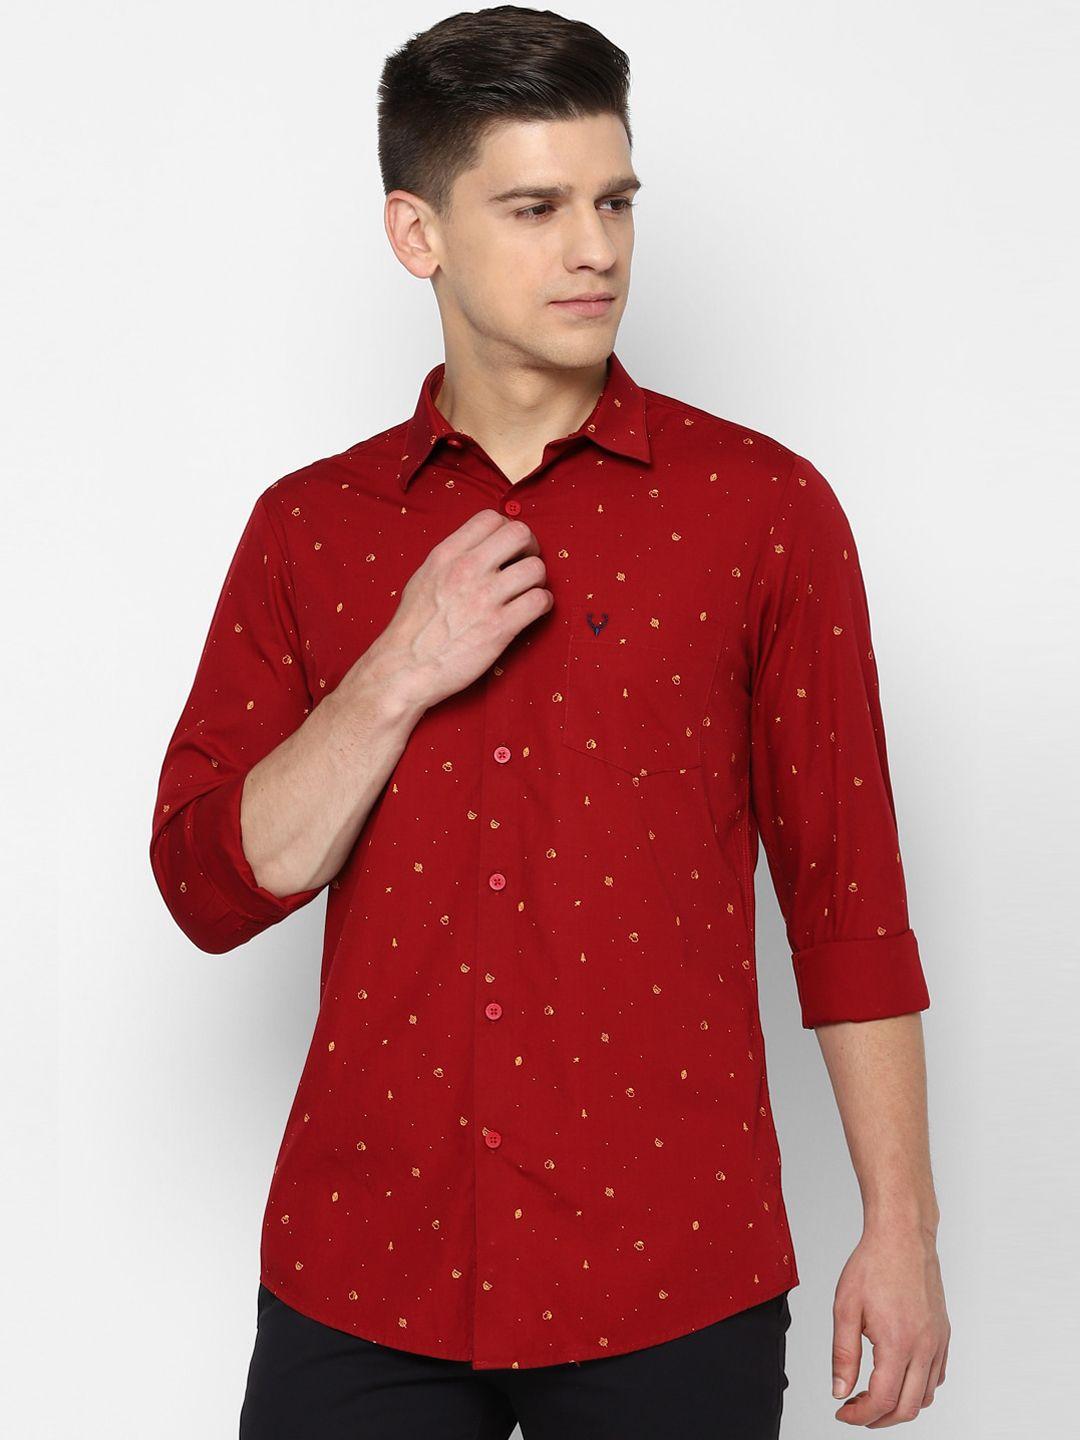 allen solly men red slim fit opaque printed casual shirt